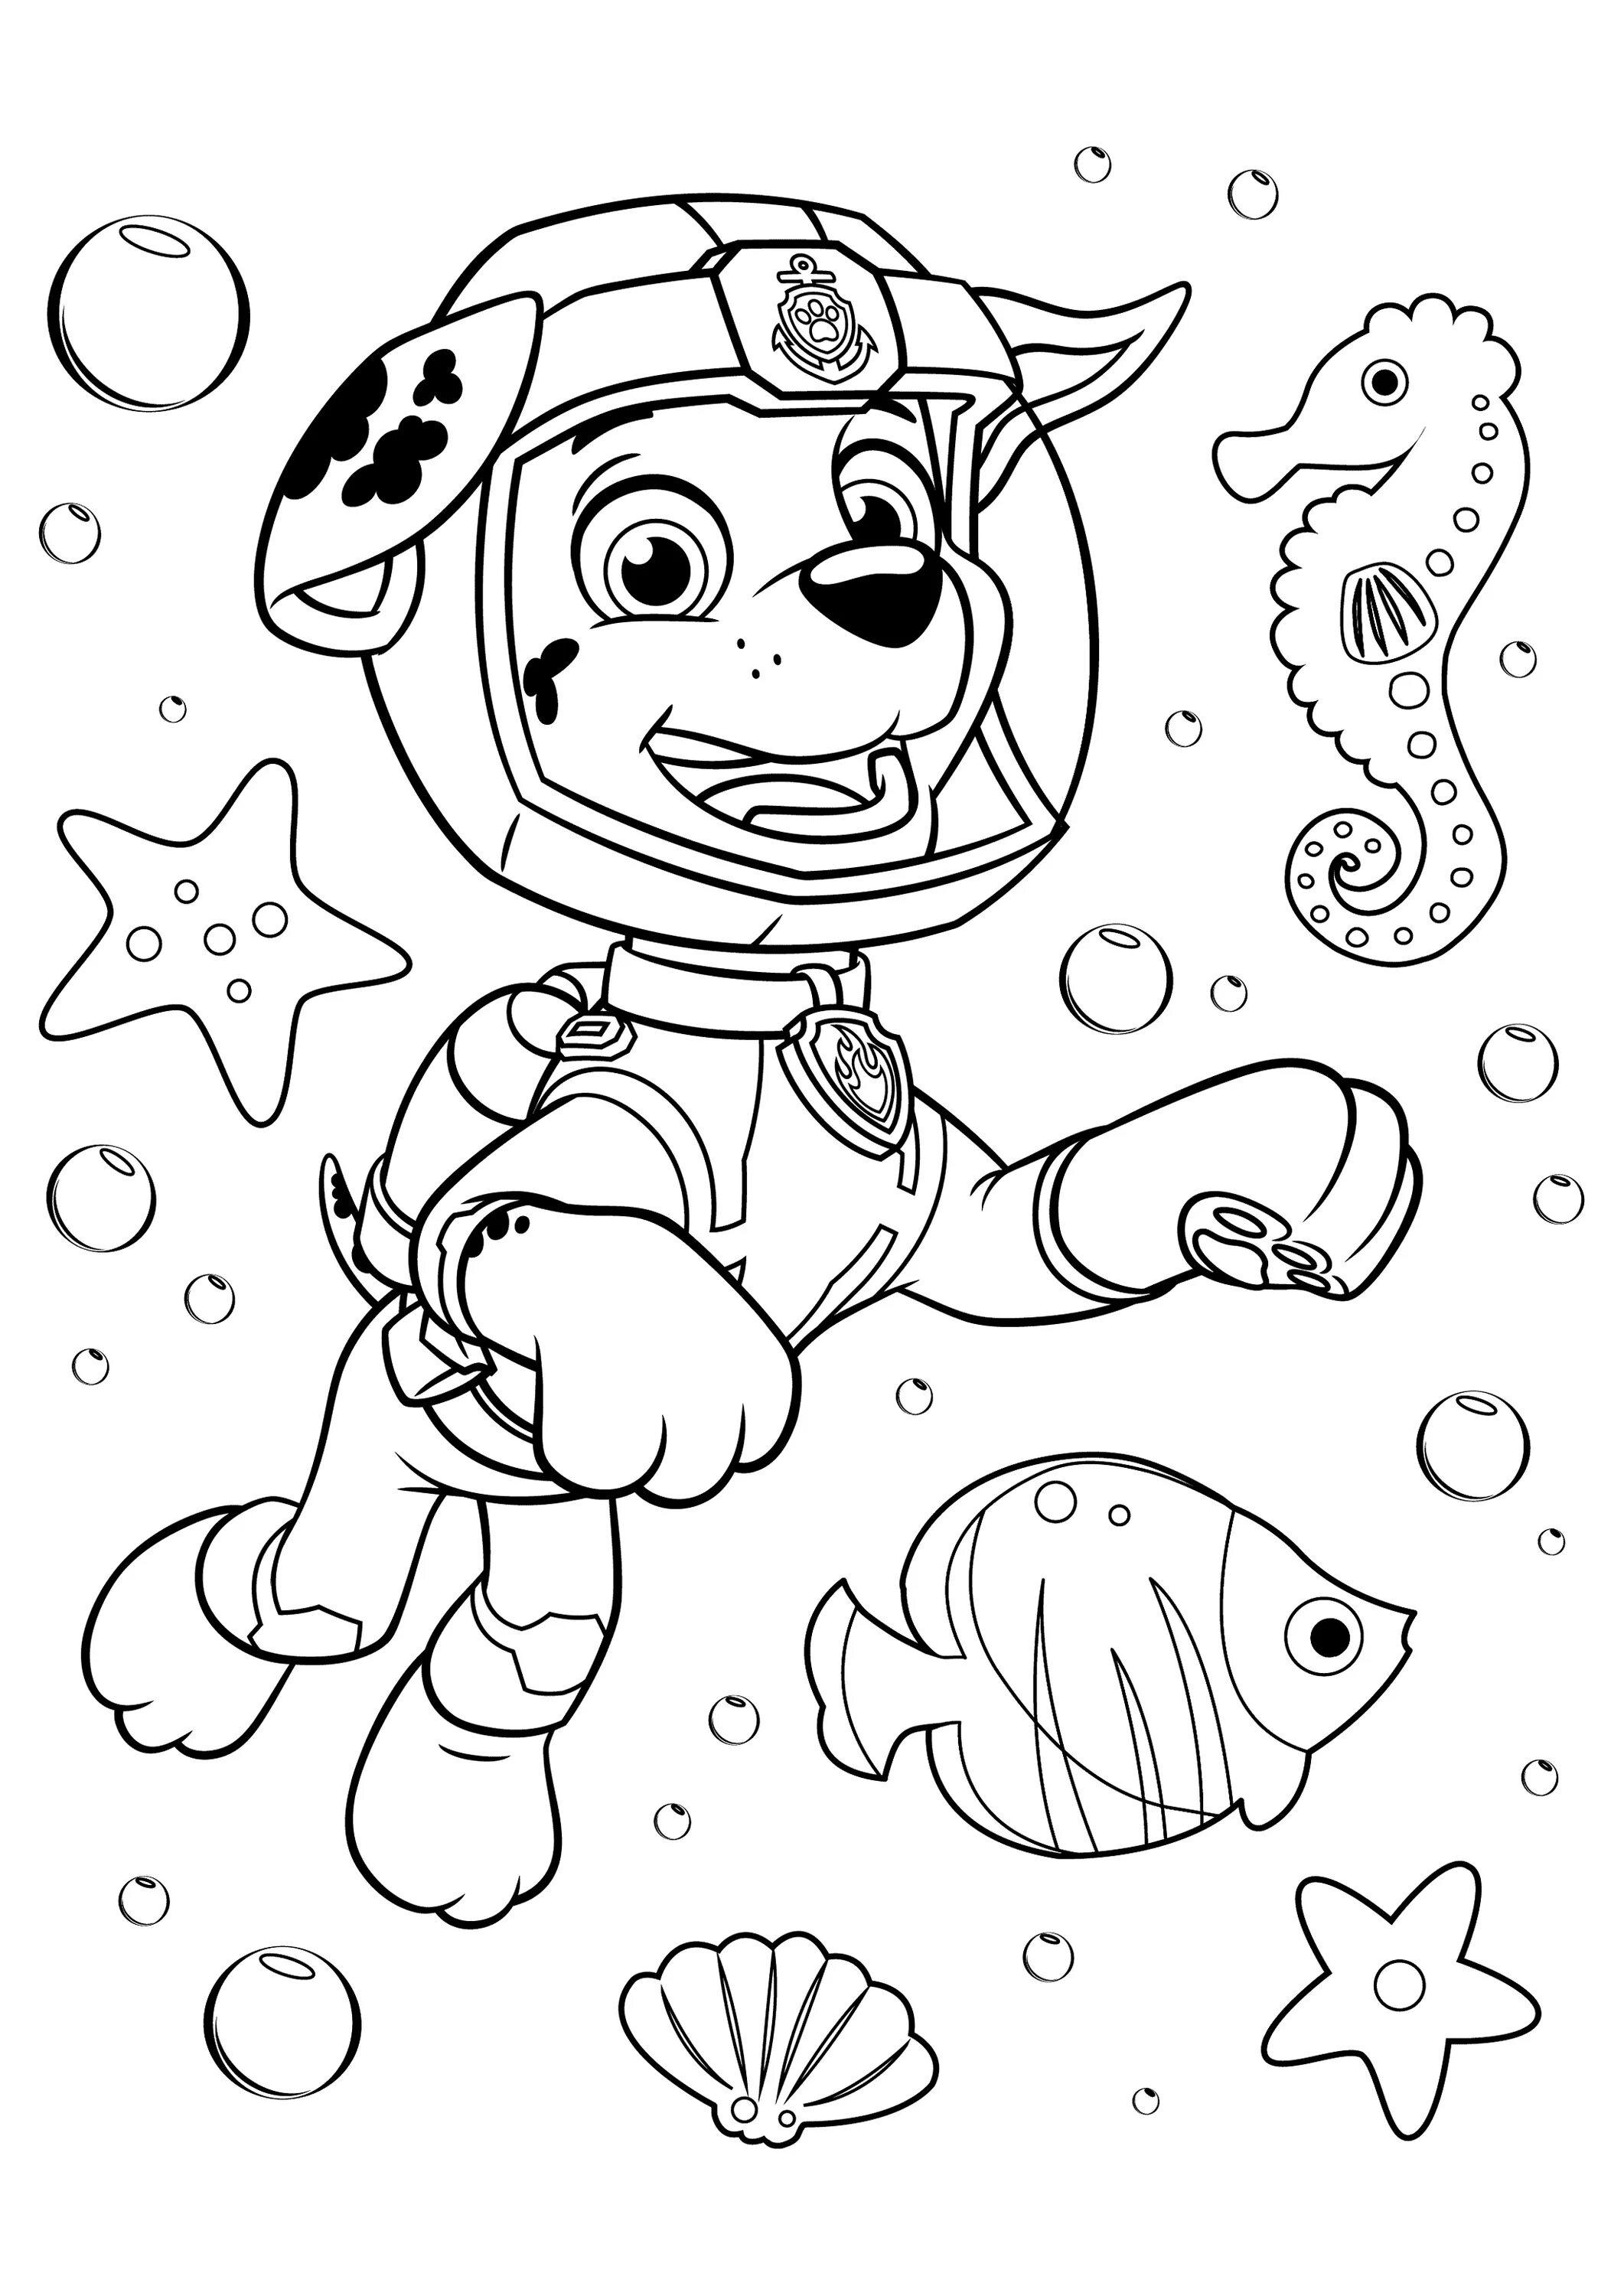 Magic marshal coloring book for kids